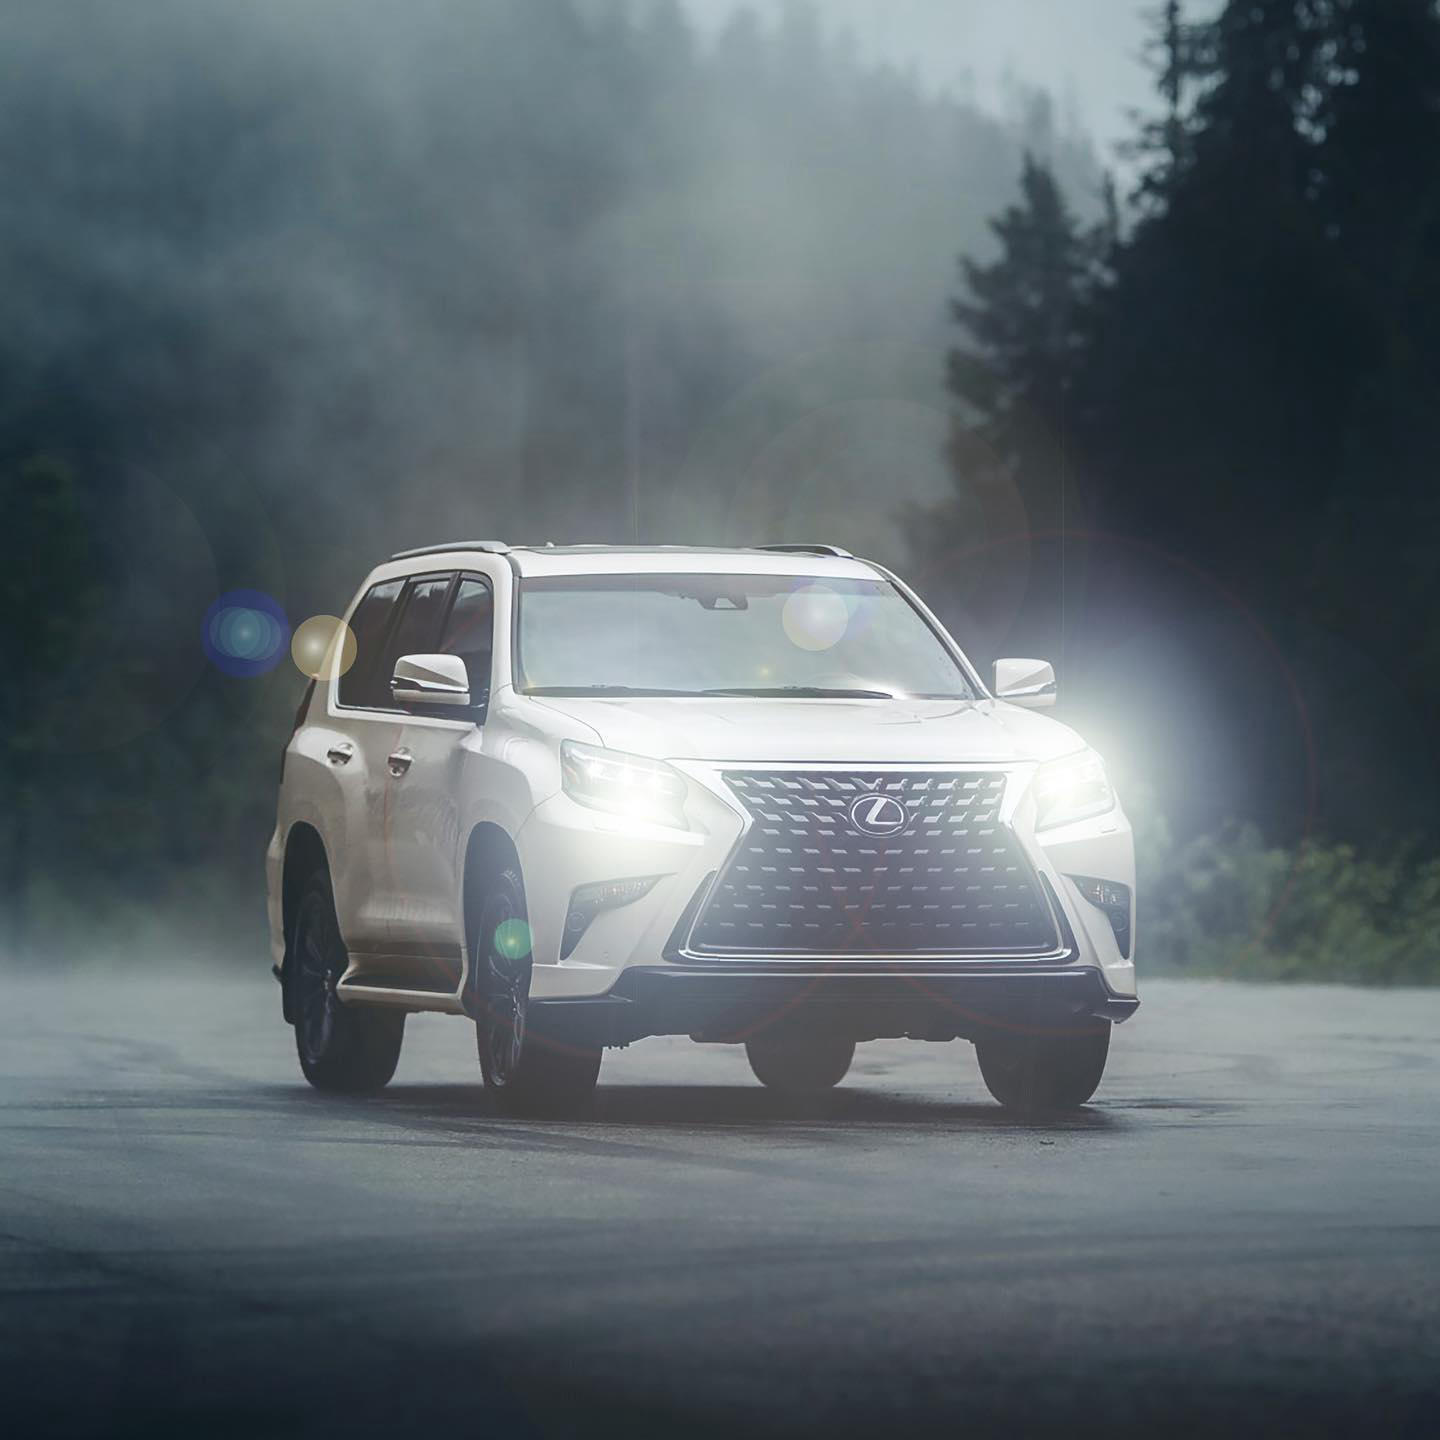 image  1 Lexus - The official get-up-and-go vehicle